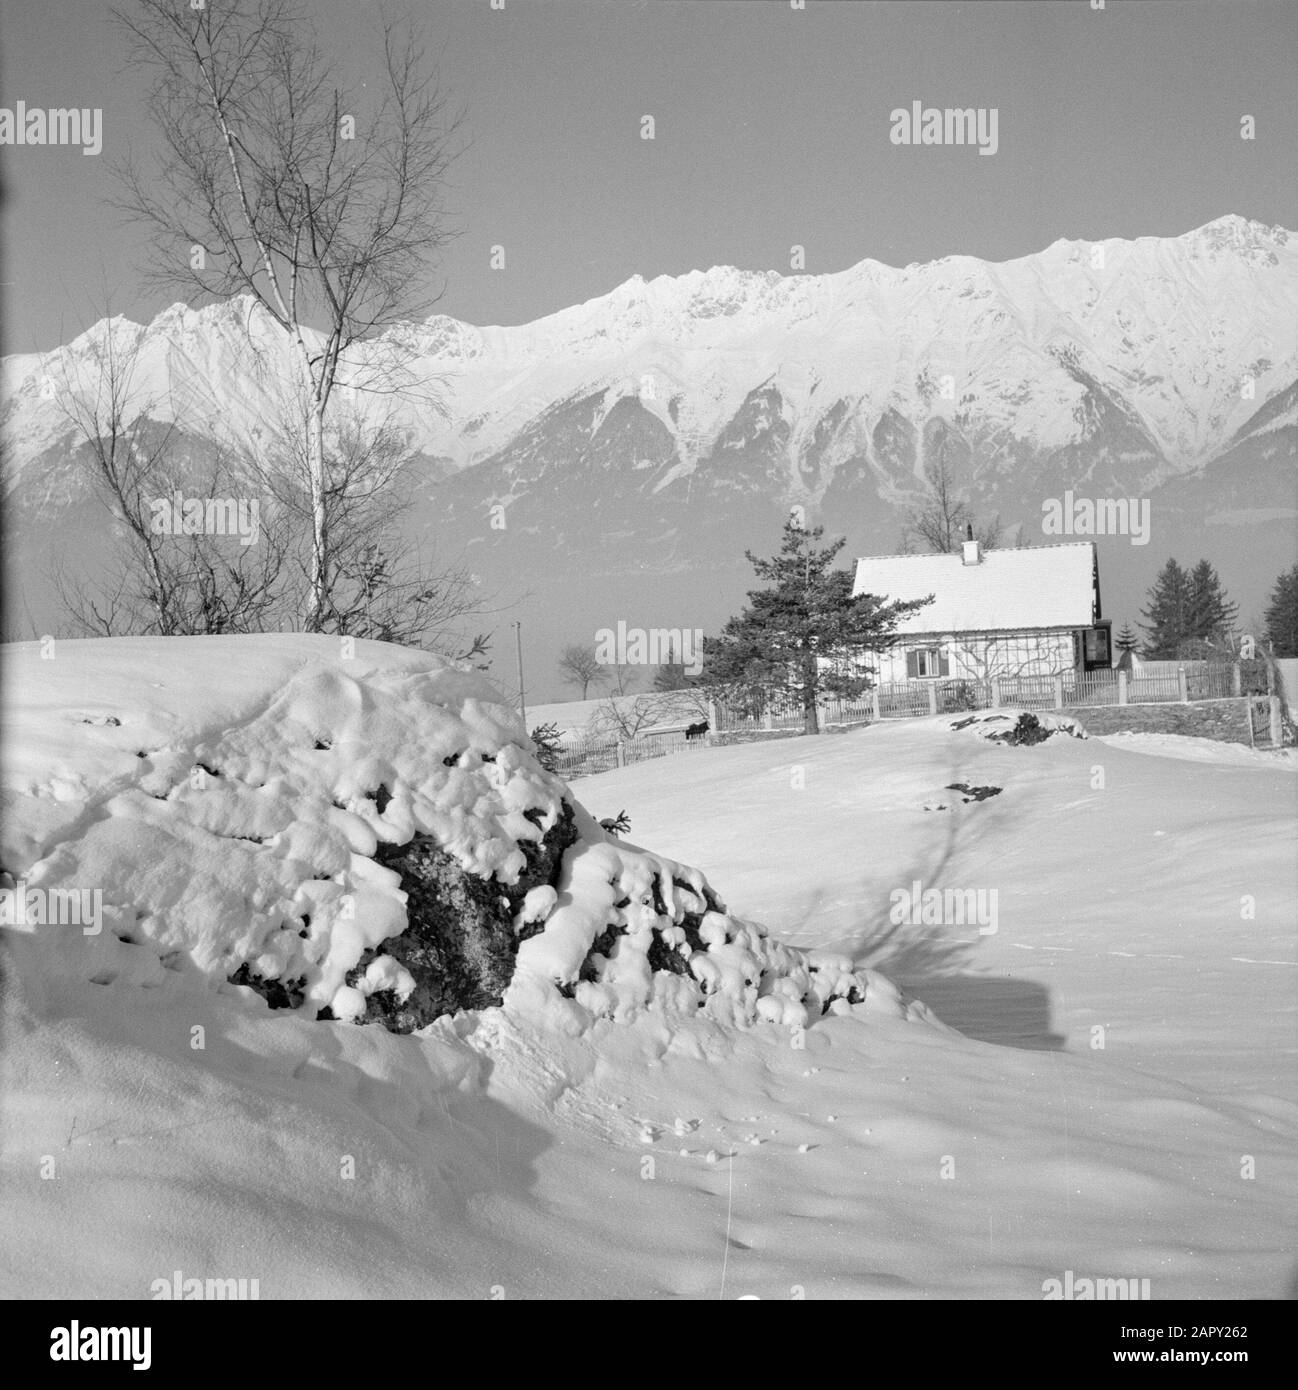 Winter in Tyrol  Property in the snow with the Karwendel Mountains in the background Date: January 1960 Location: Austria, Sistrans, Tyrol Keywords: mountains, landscapes, snow, winter, homes Stock Photo